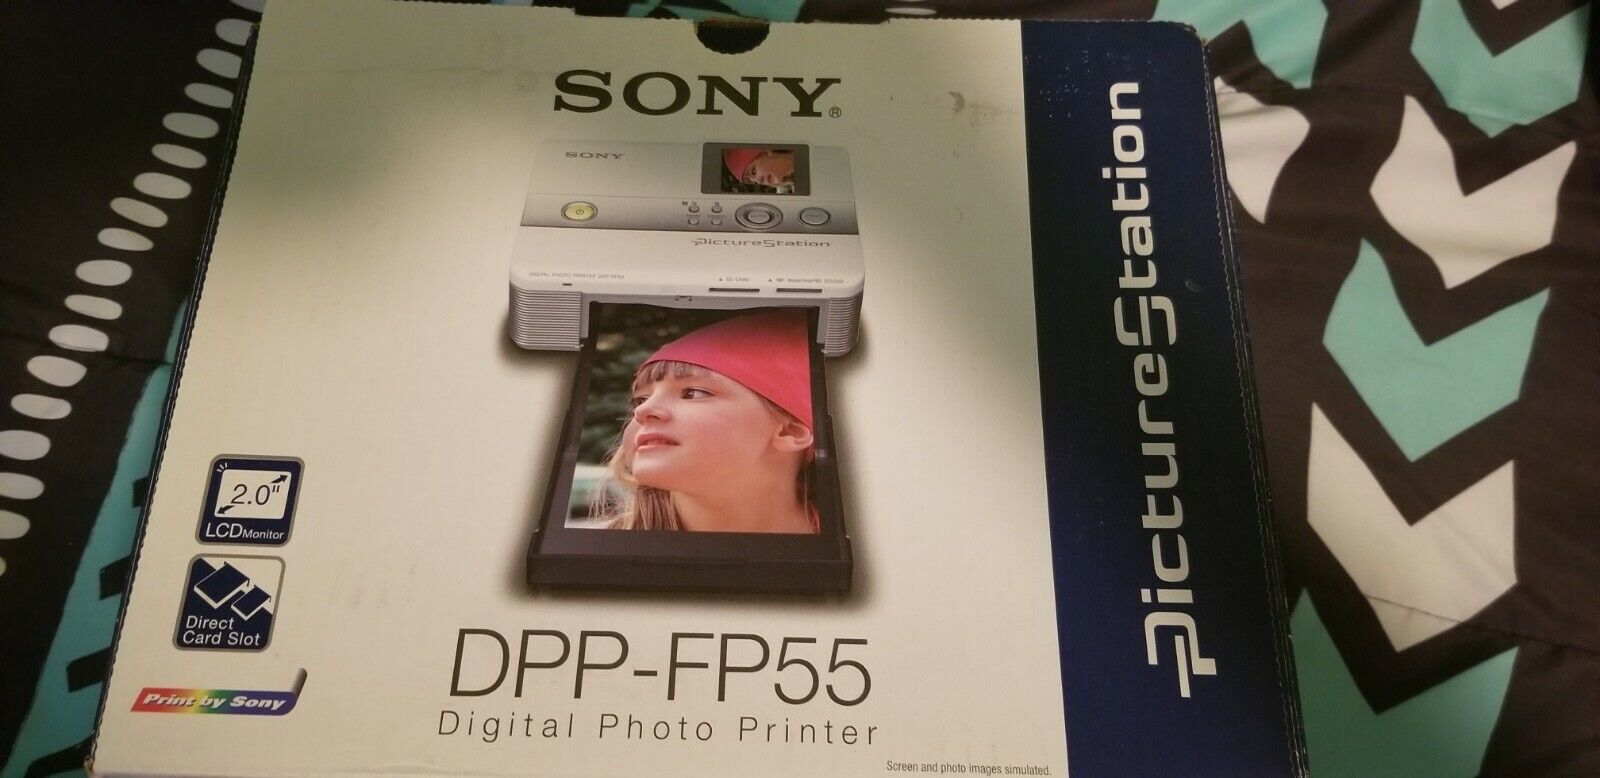 Sony DPP-FP55 Picture Station - Digital Photo Color Printer with LCD Screen